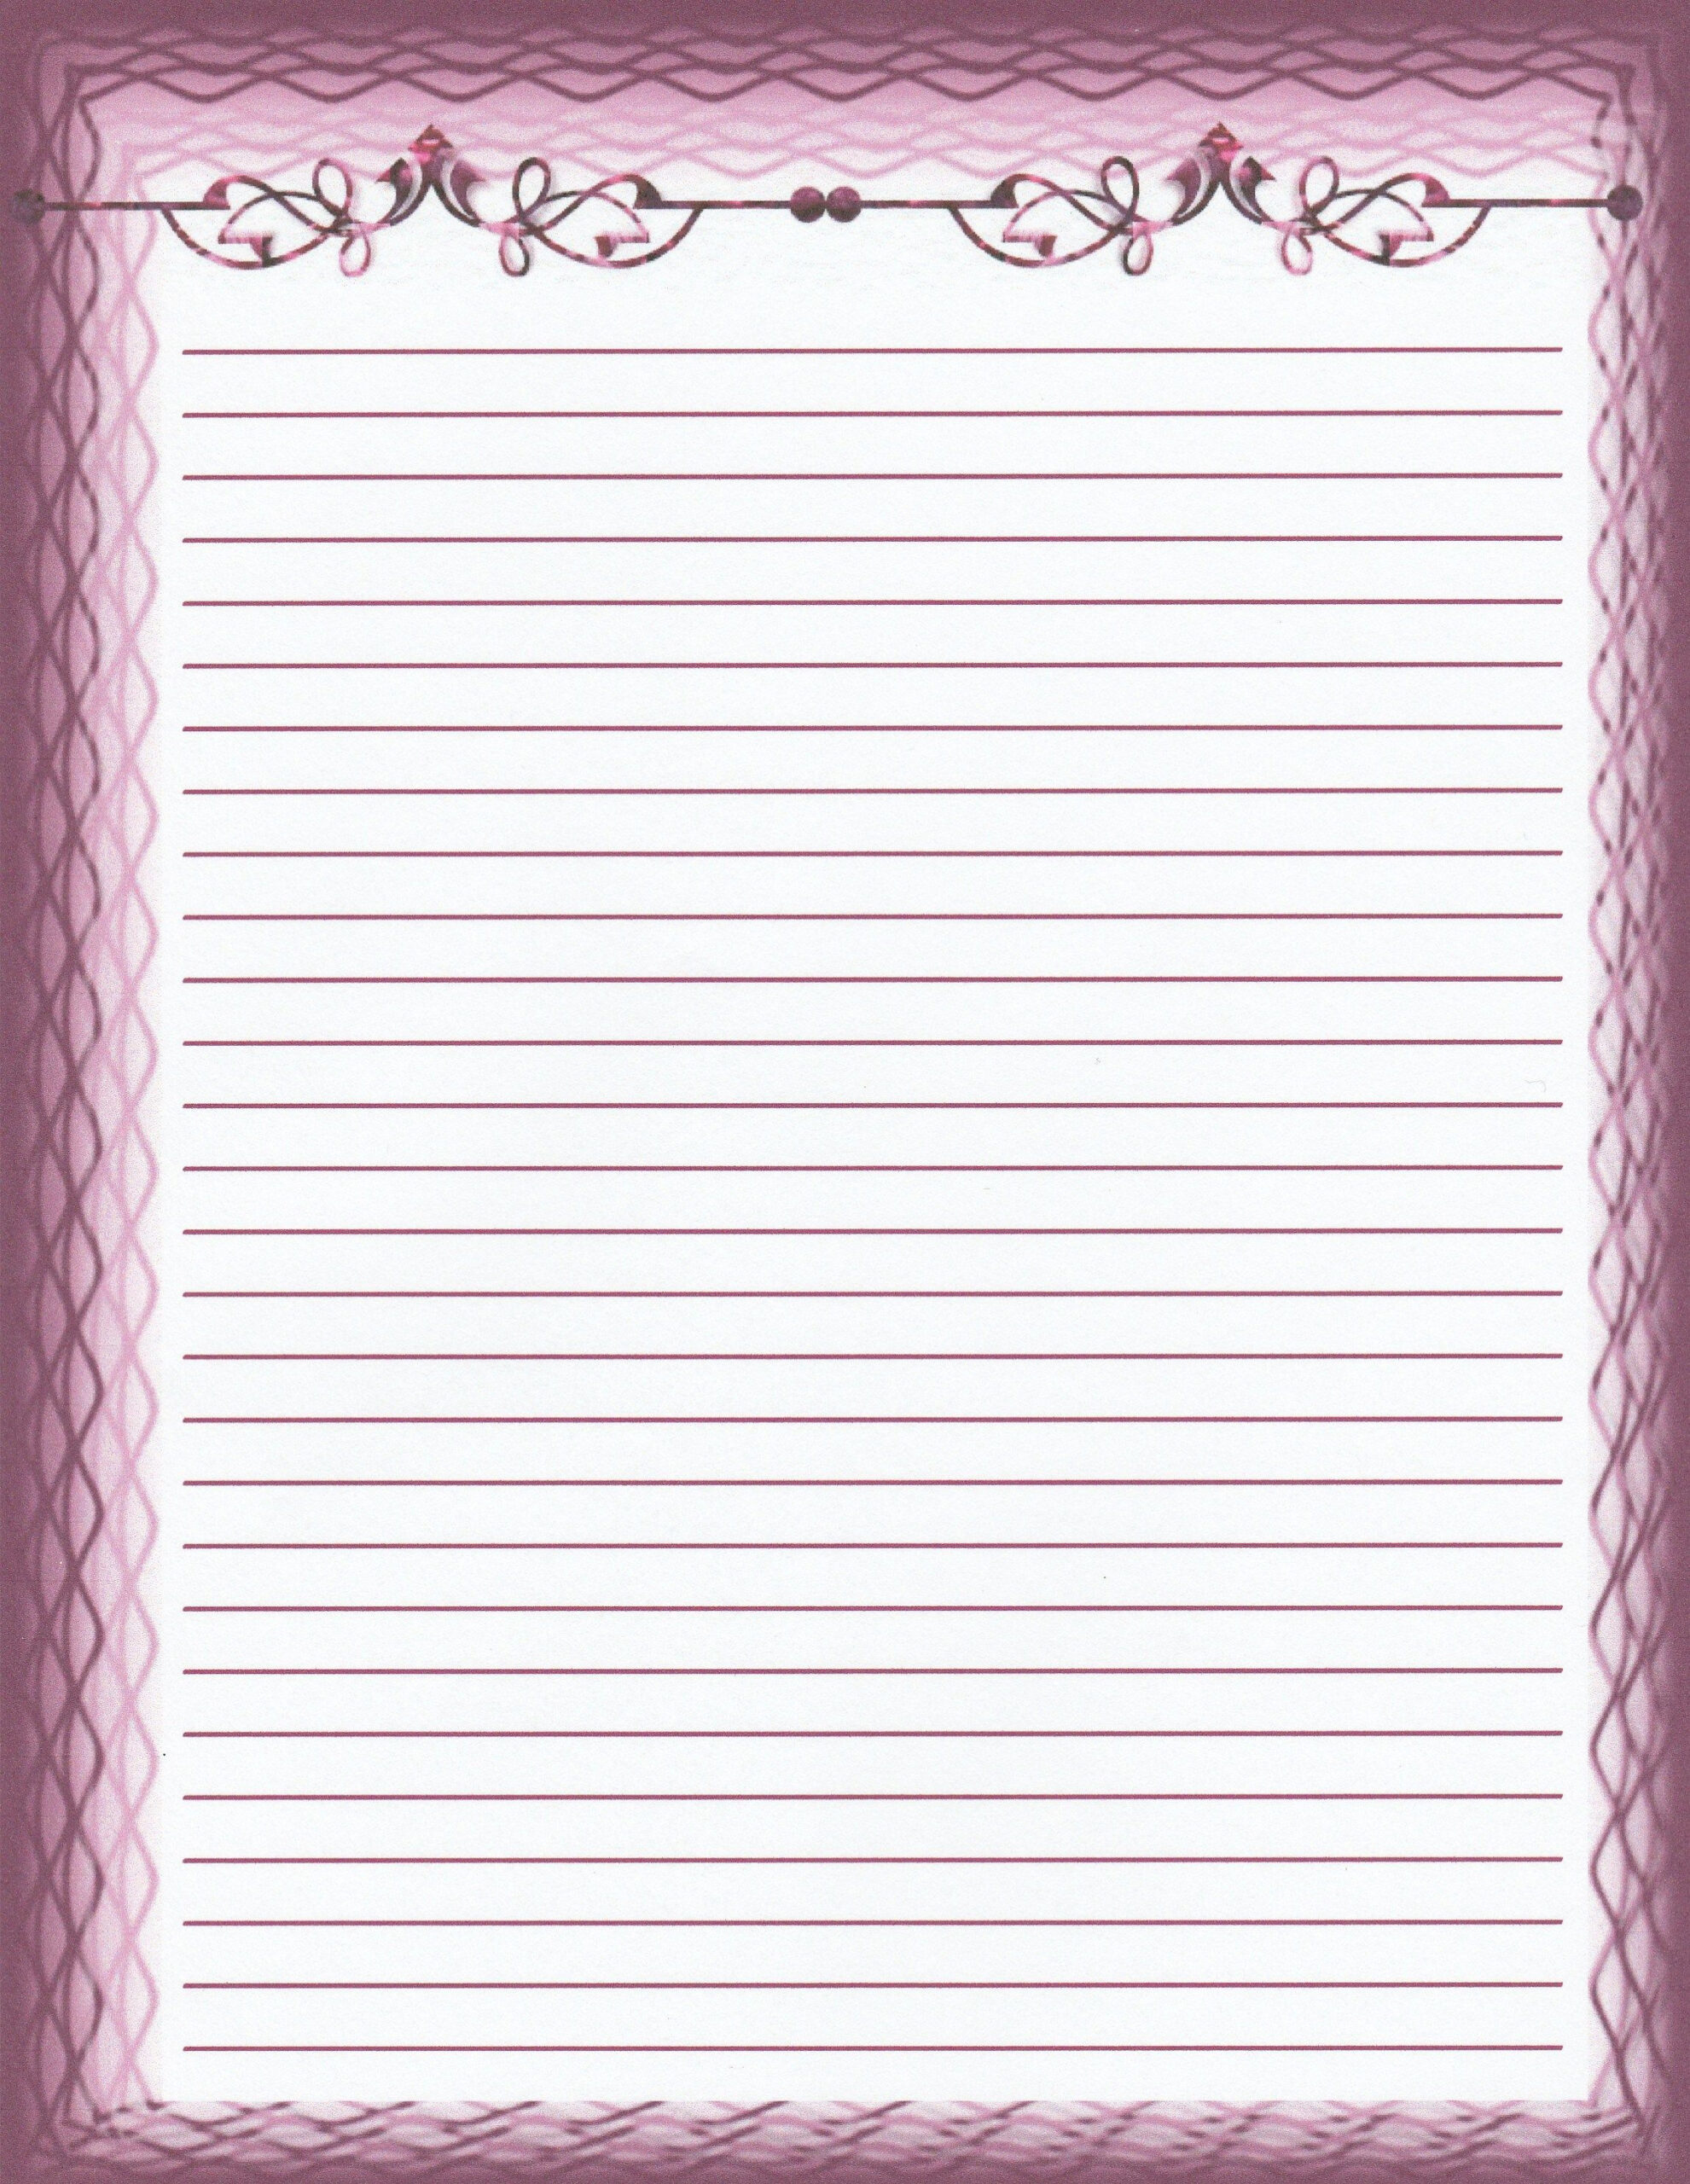 Free Printable Lined Writing Paper Stationery